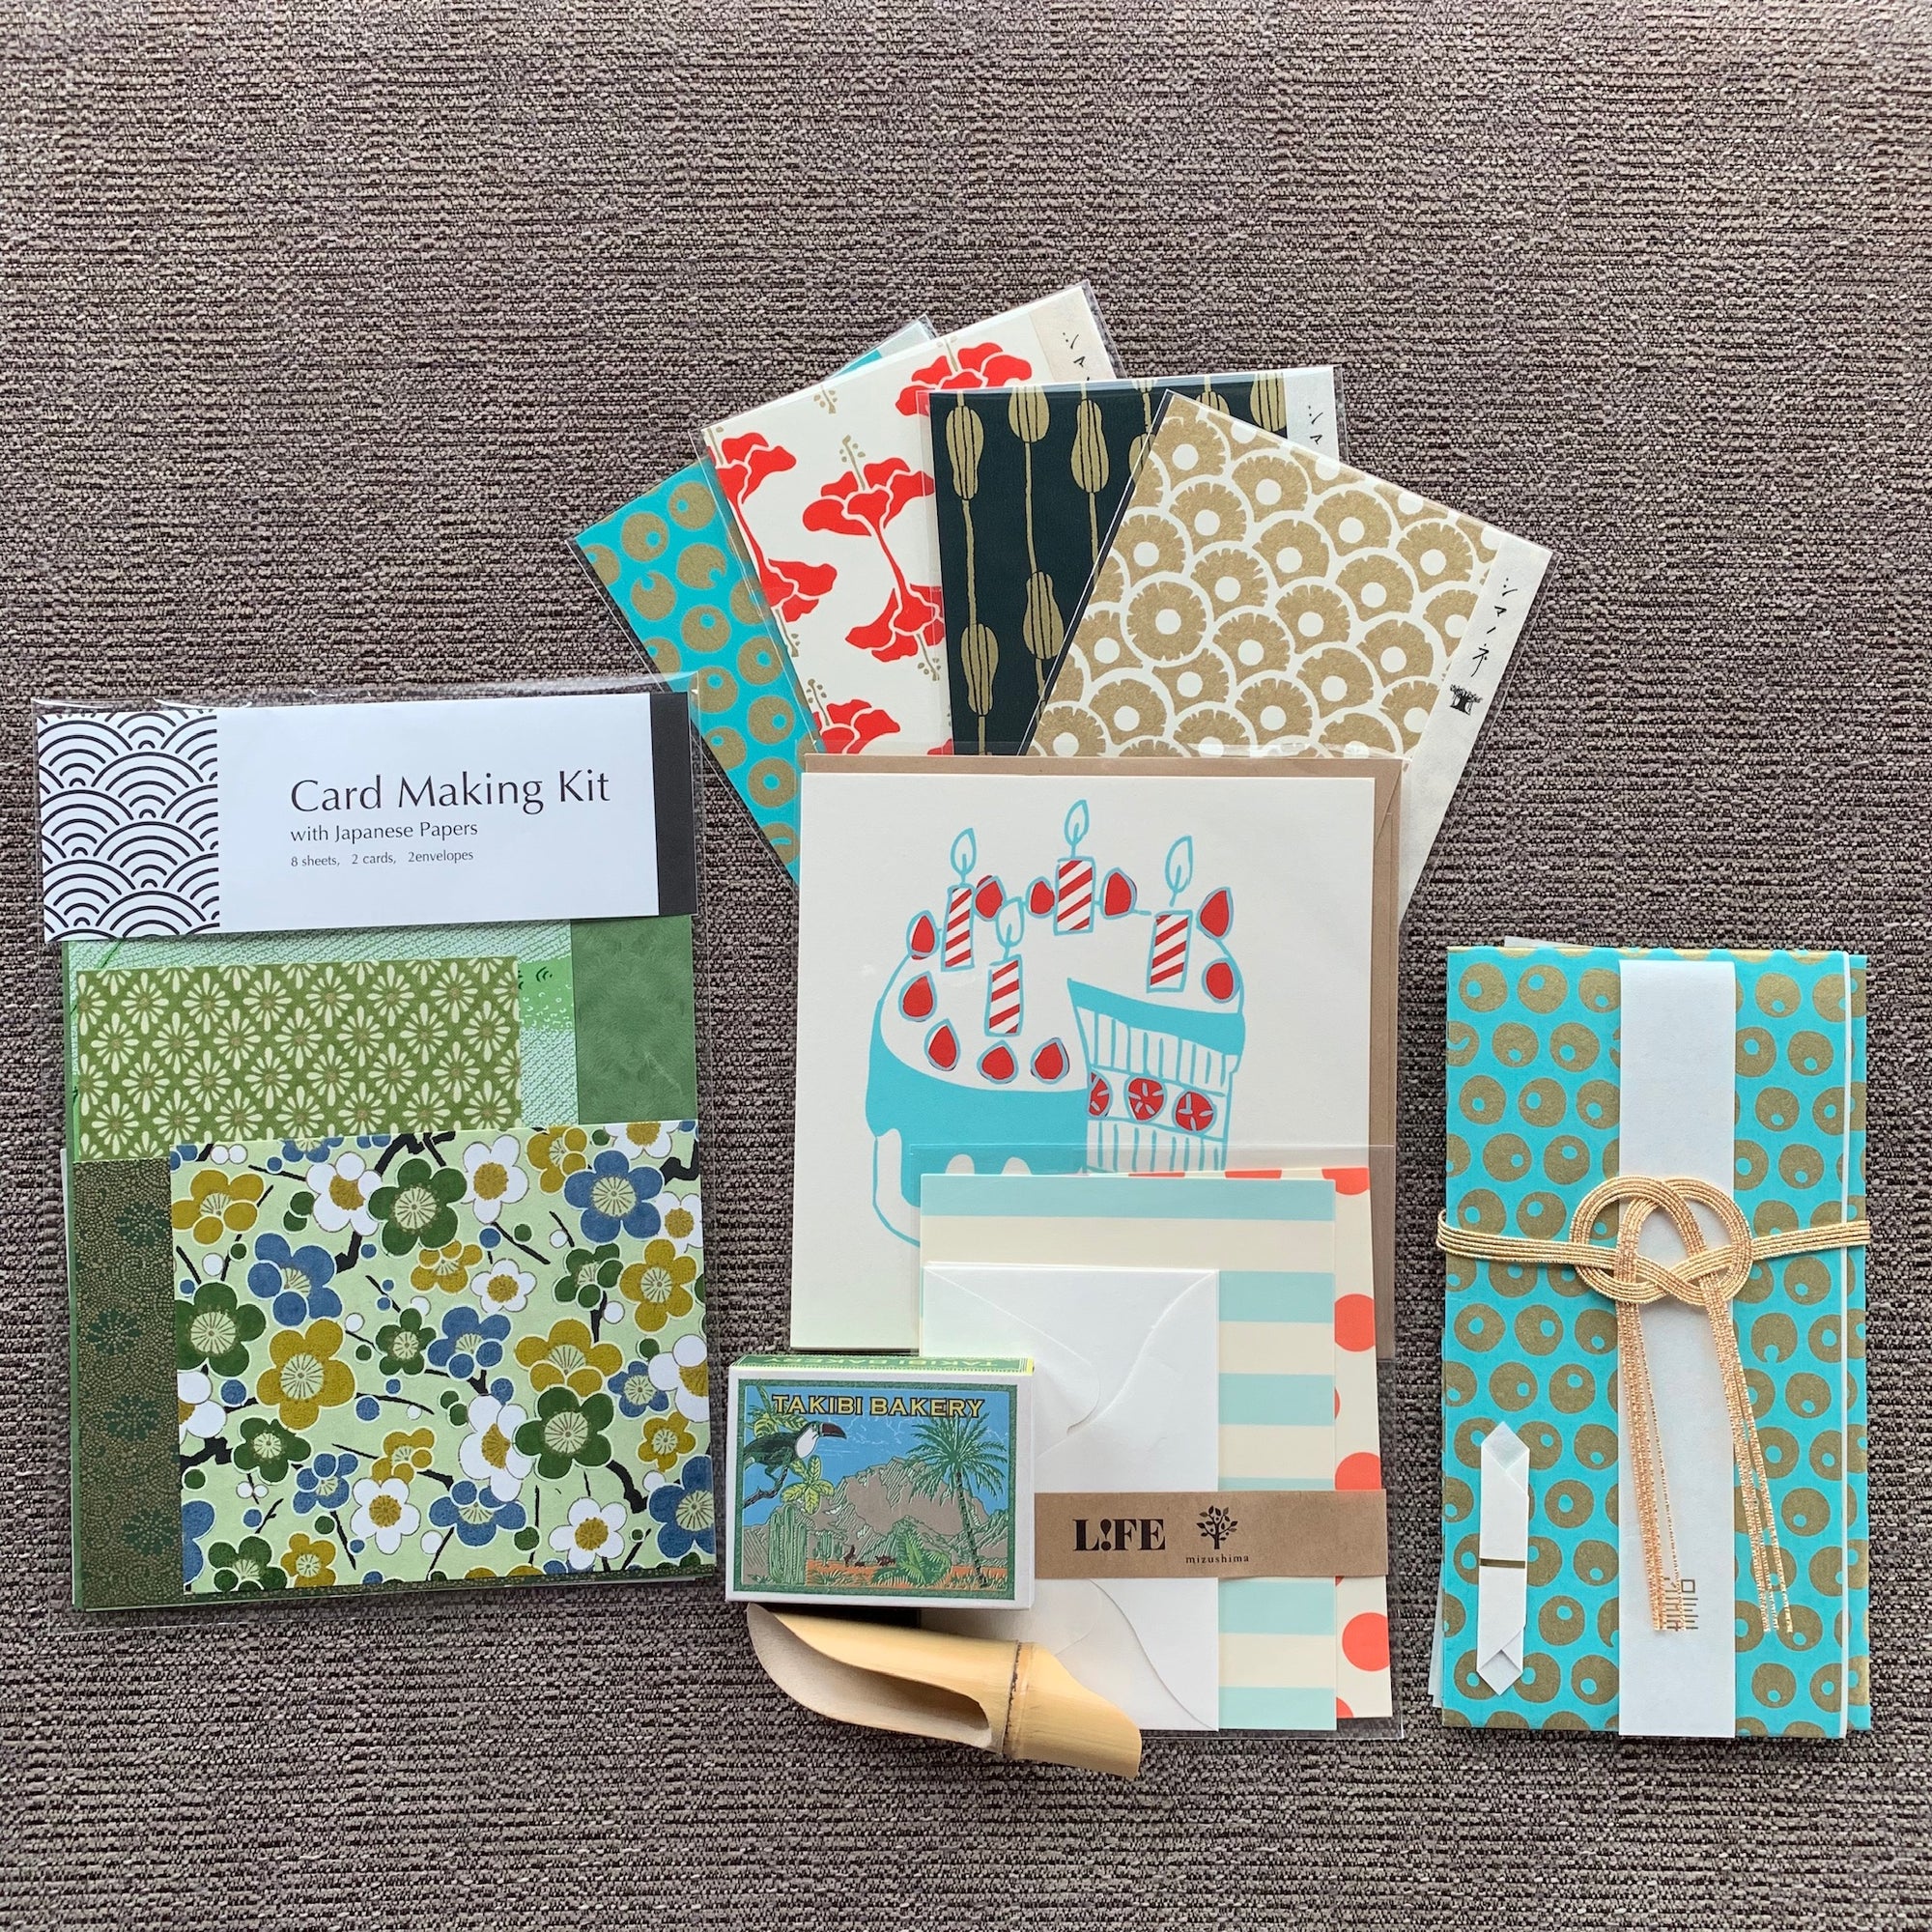 Japanese Stationery Tour: Our Top 10 Picks - Part I